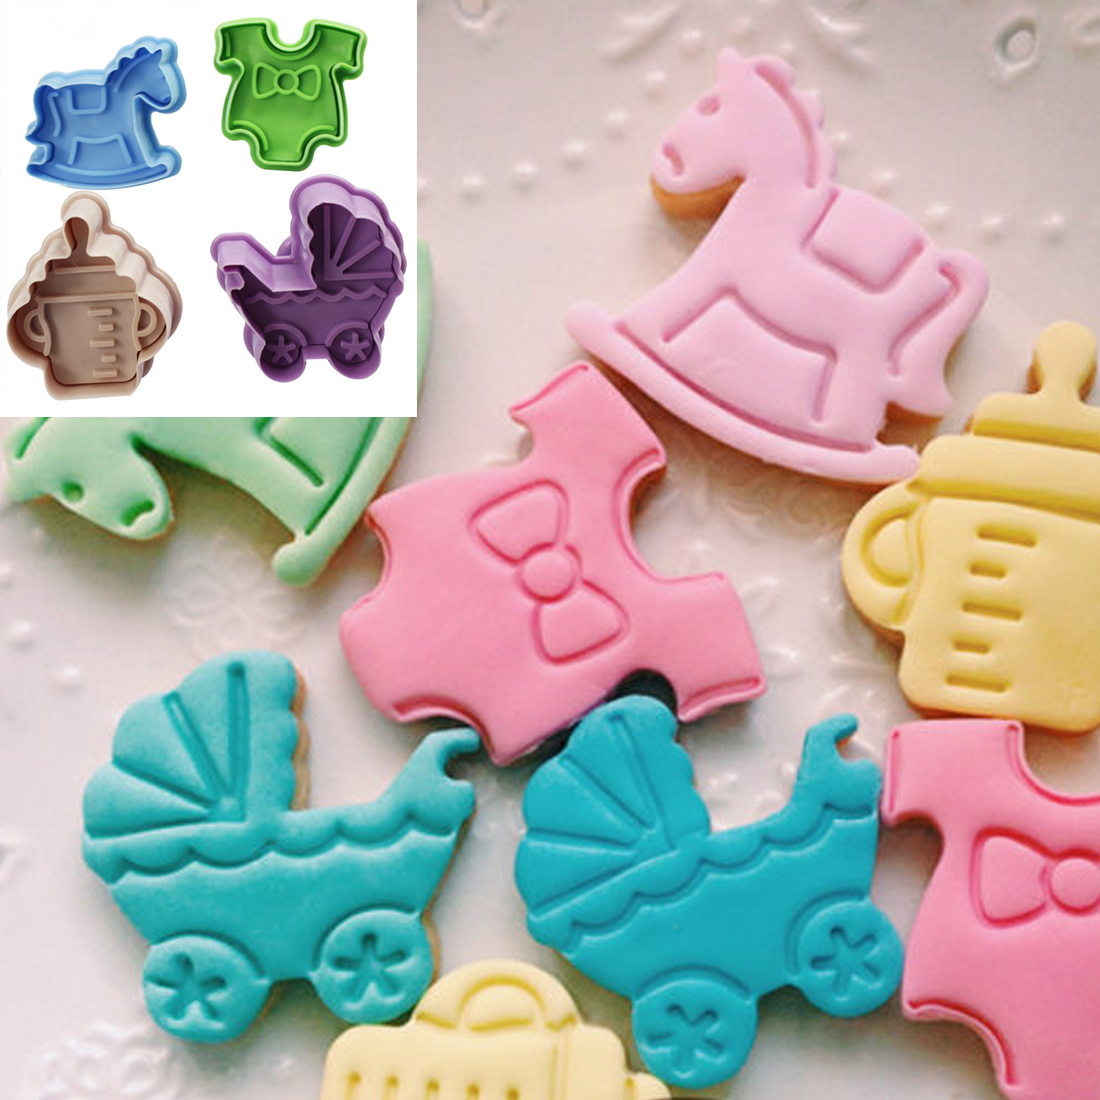 Plastic Fondant Cookie Cutter Pastry Biscuit Cake Decorating Mold Baking Tool 